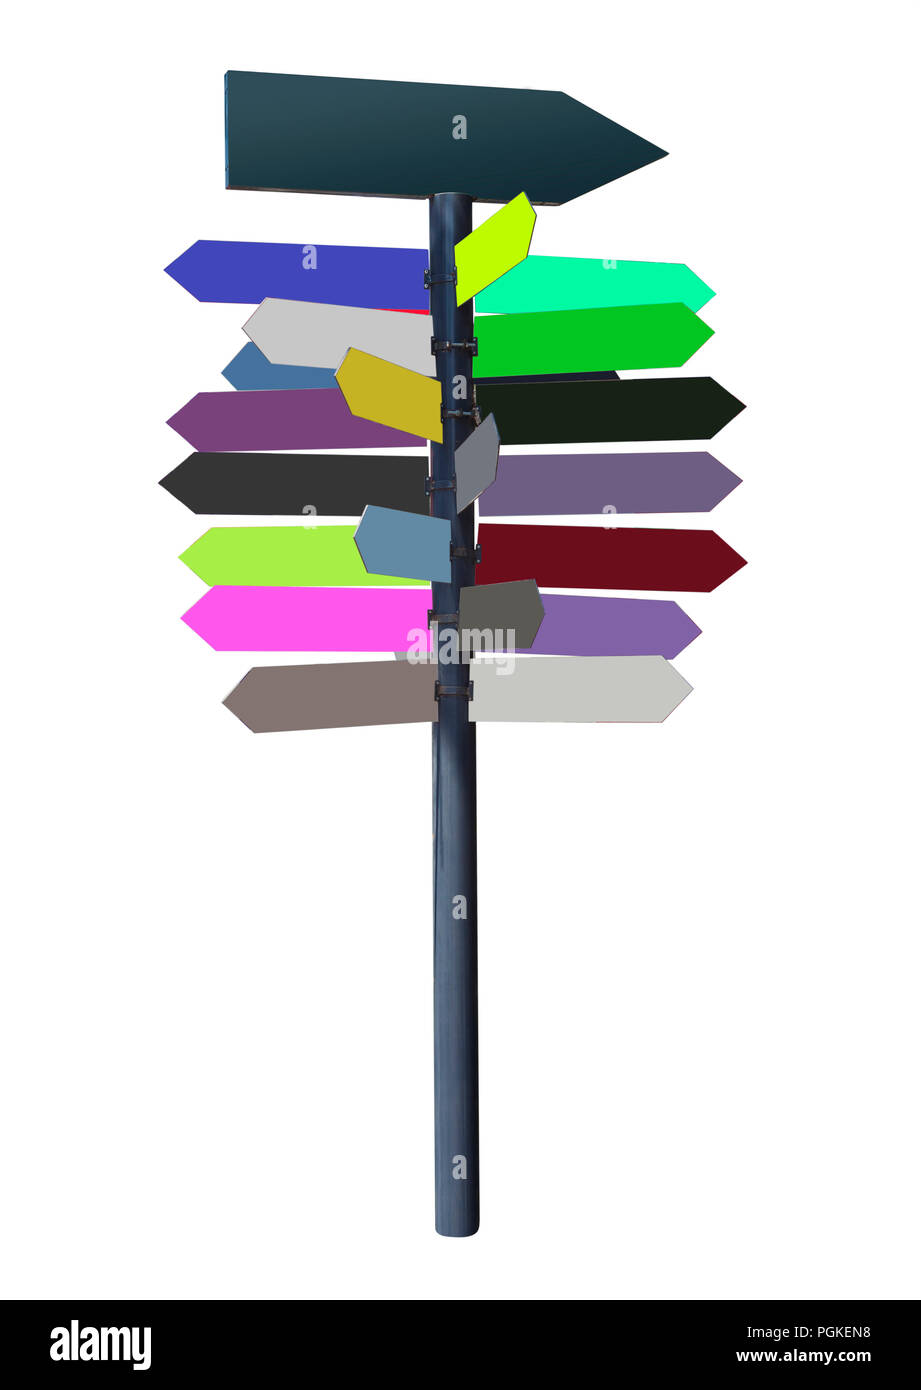 arrows sign with empty colors isolated Stock Photo